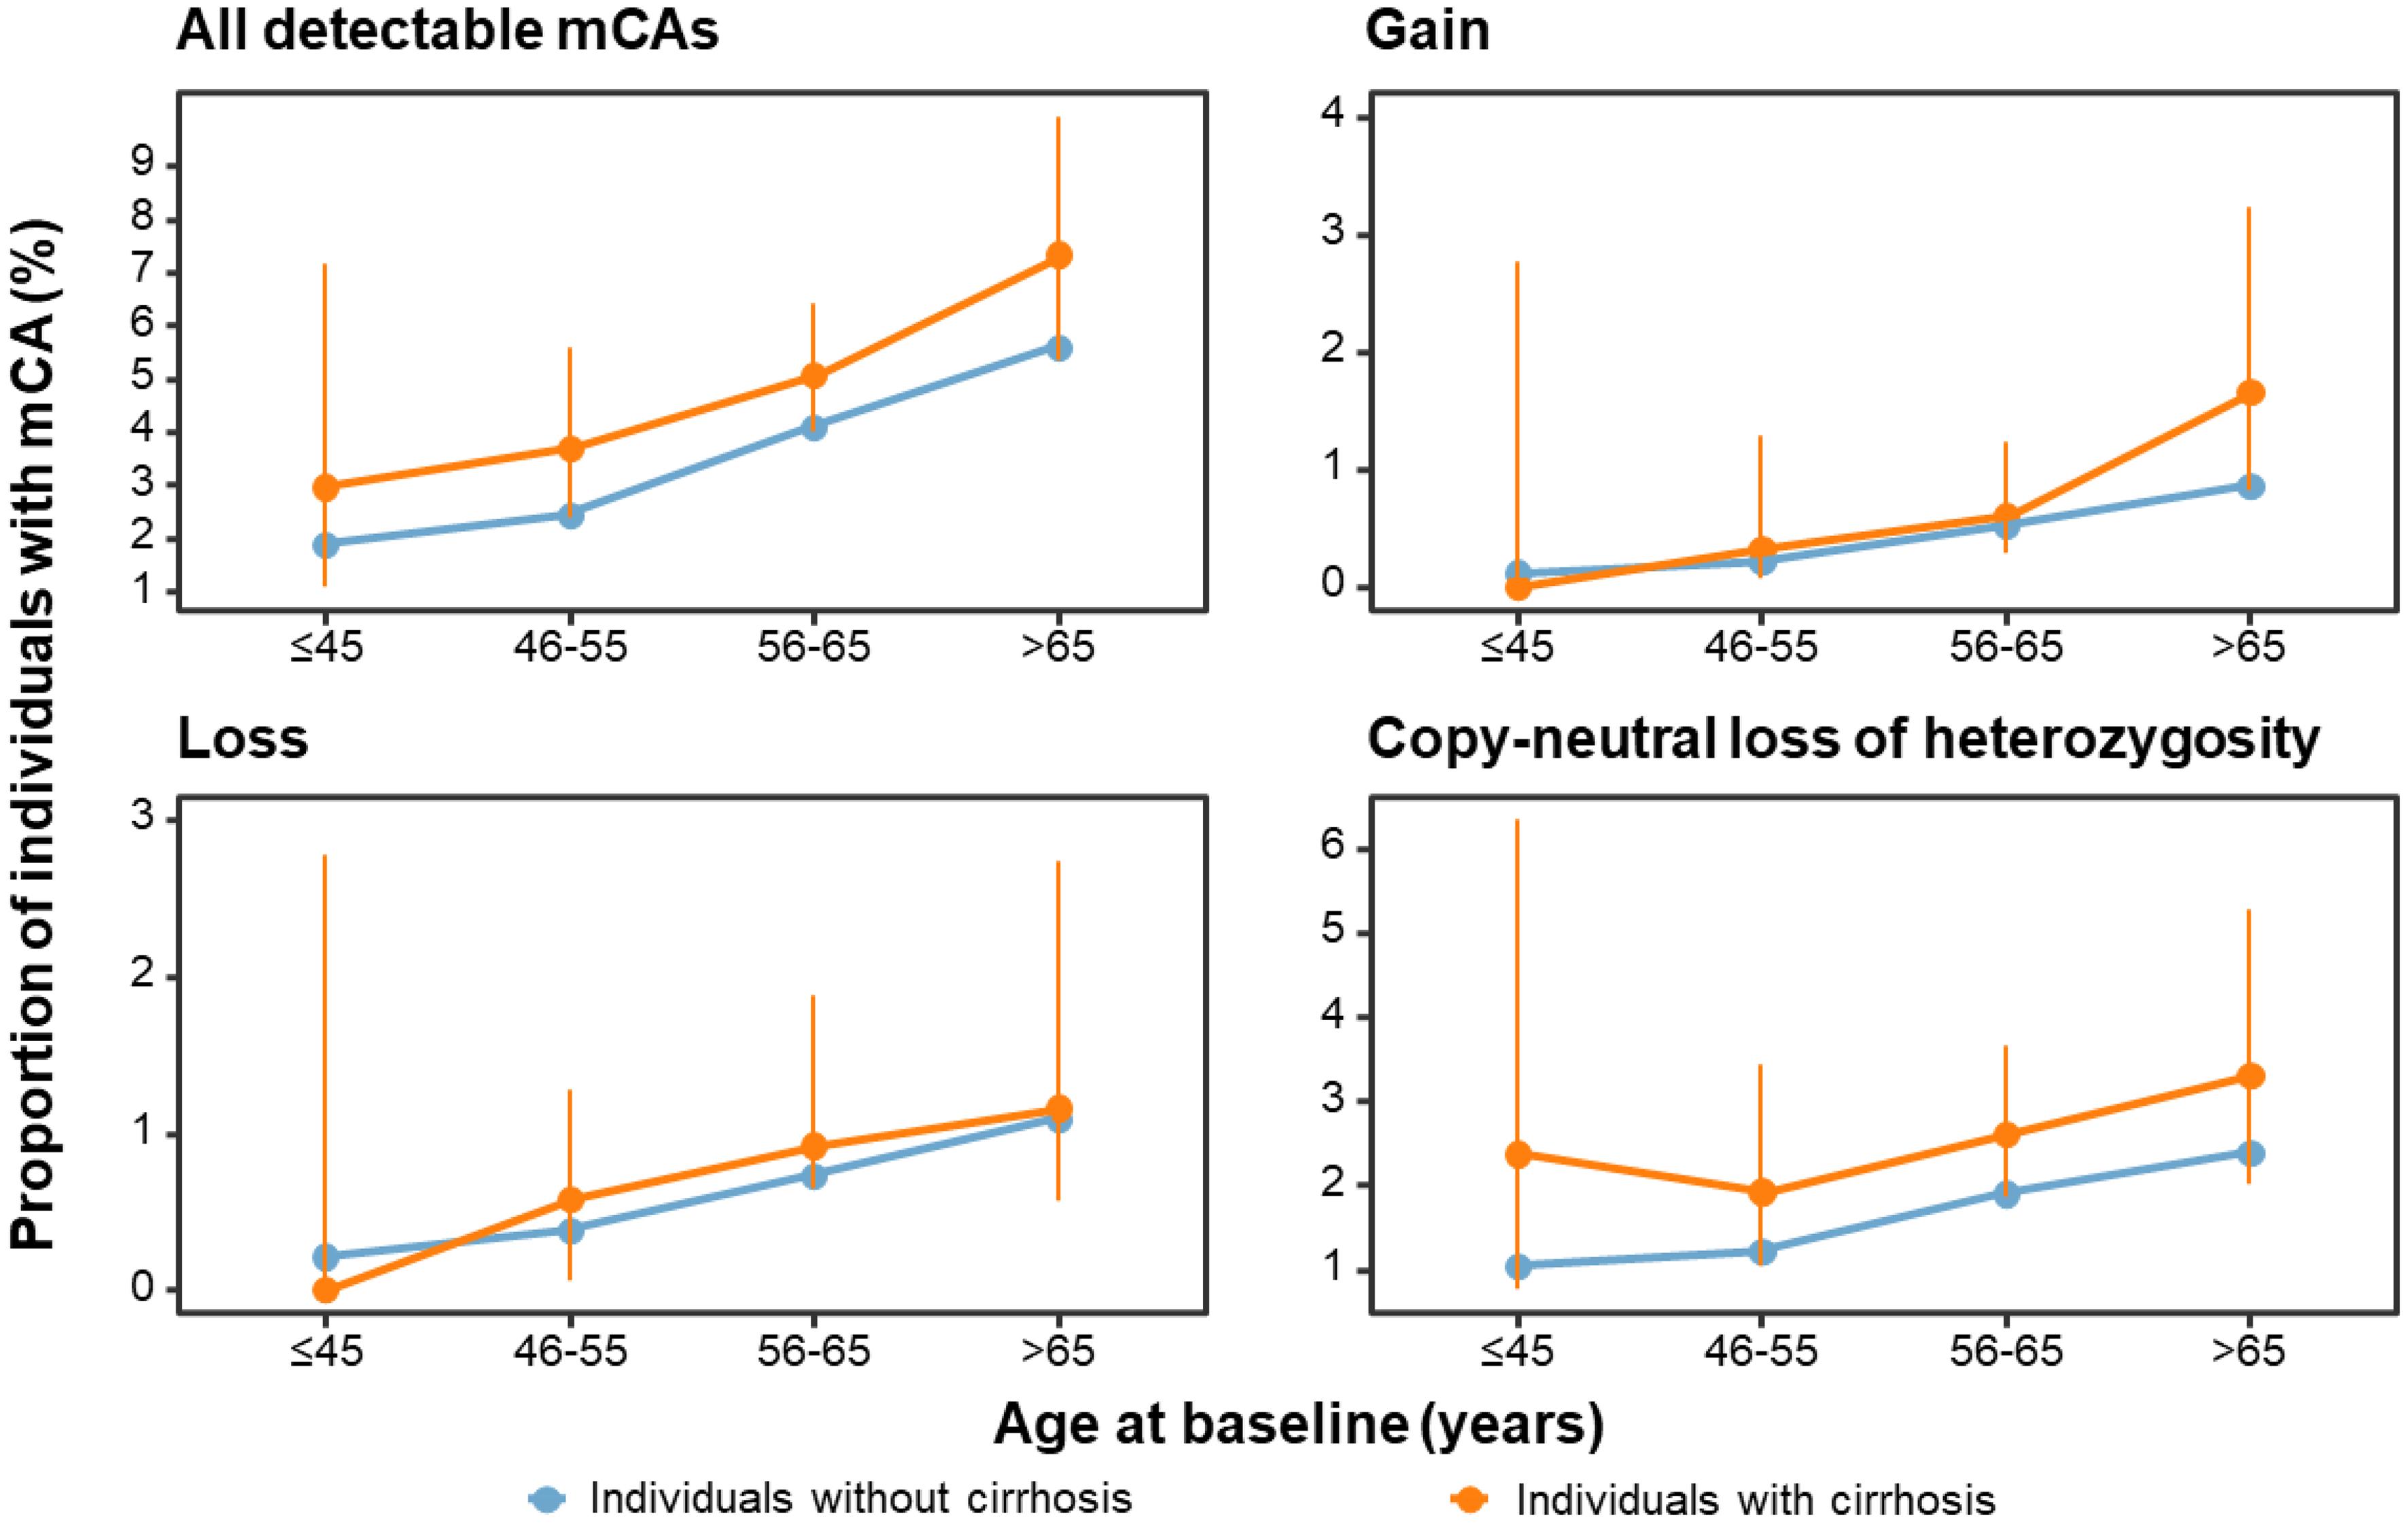 Associations between age and proportion of individuals with detectable autosomal mosaic chromosomal alterations (mCAs).